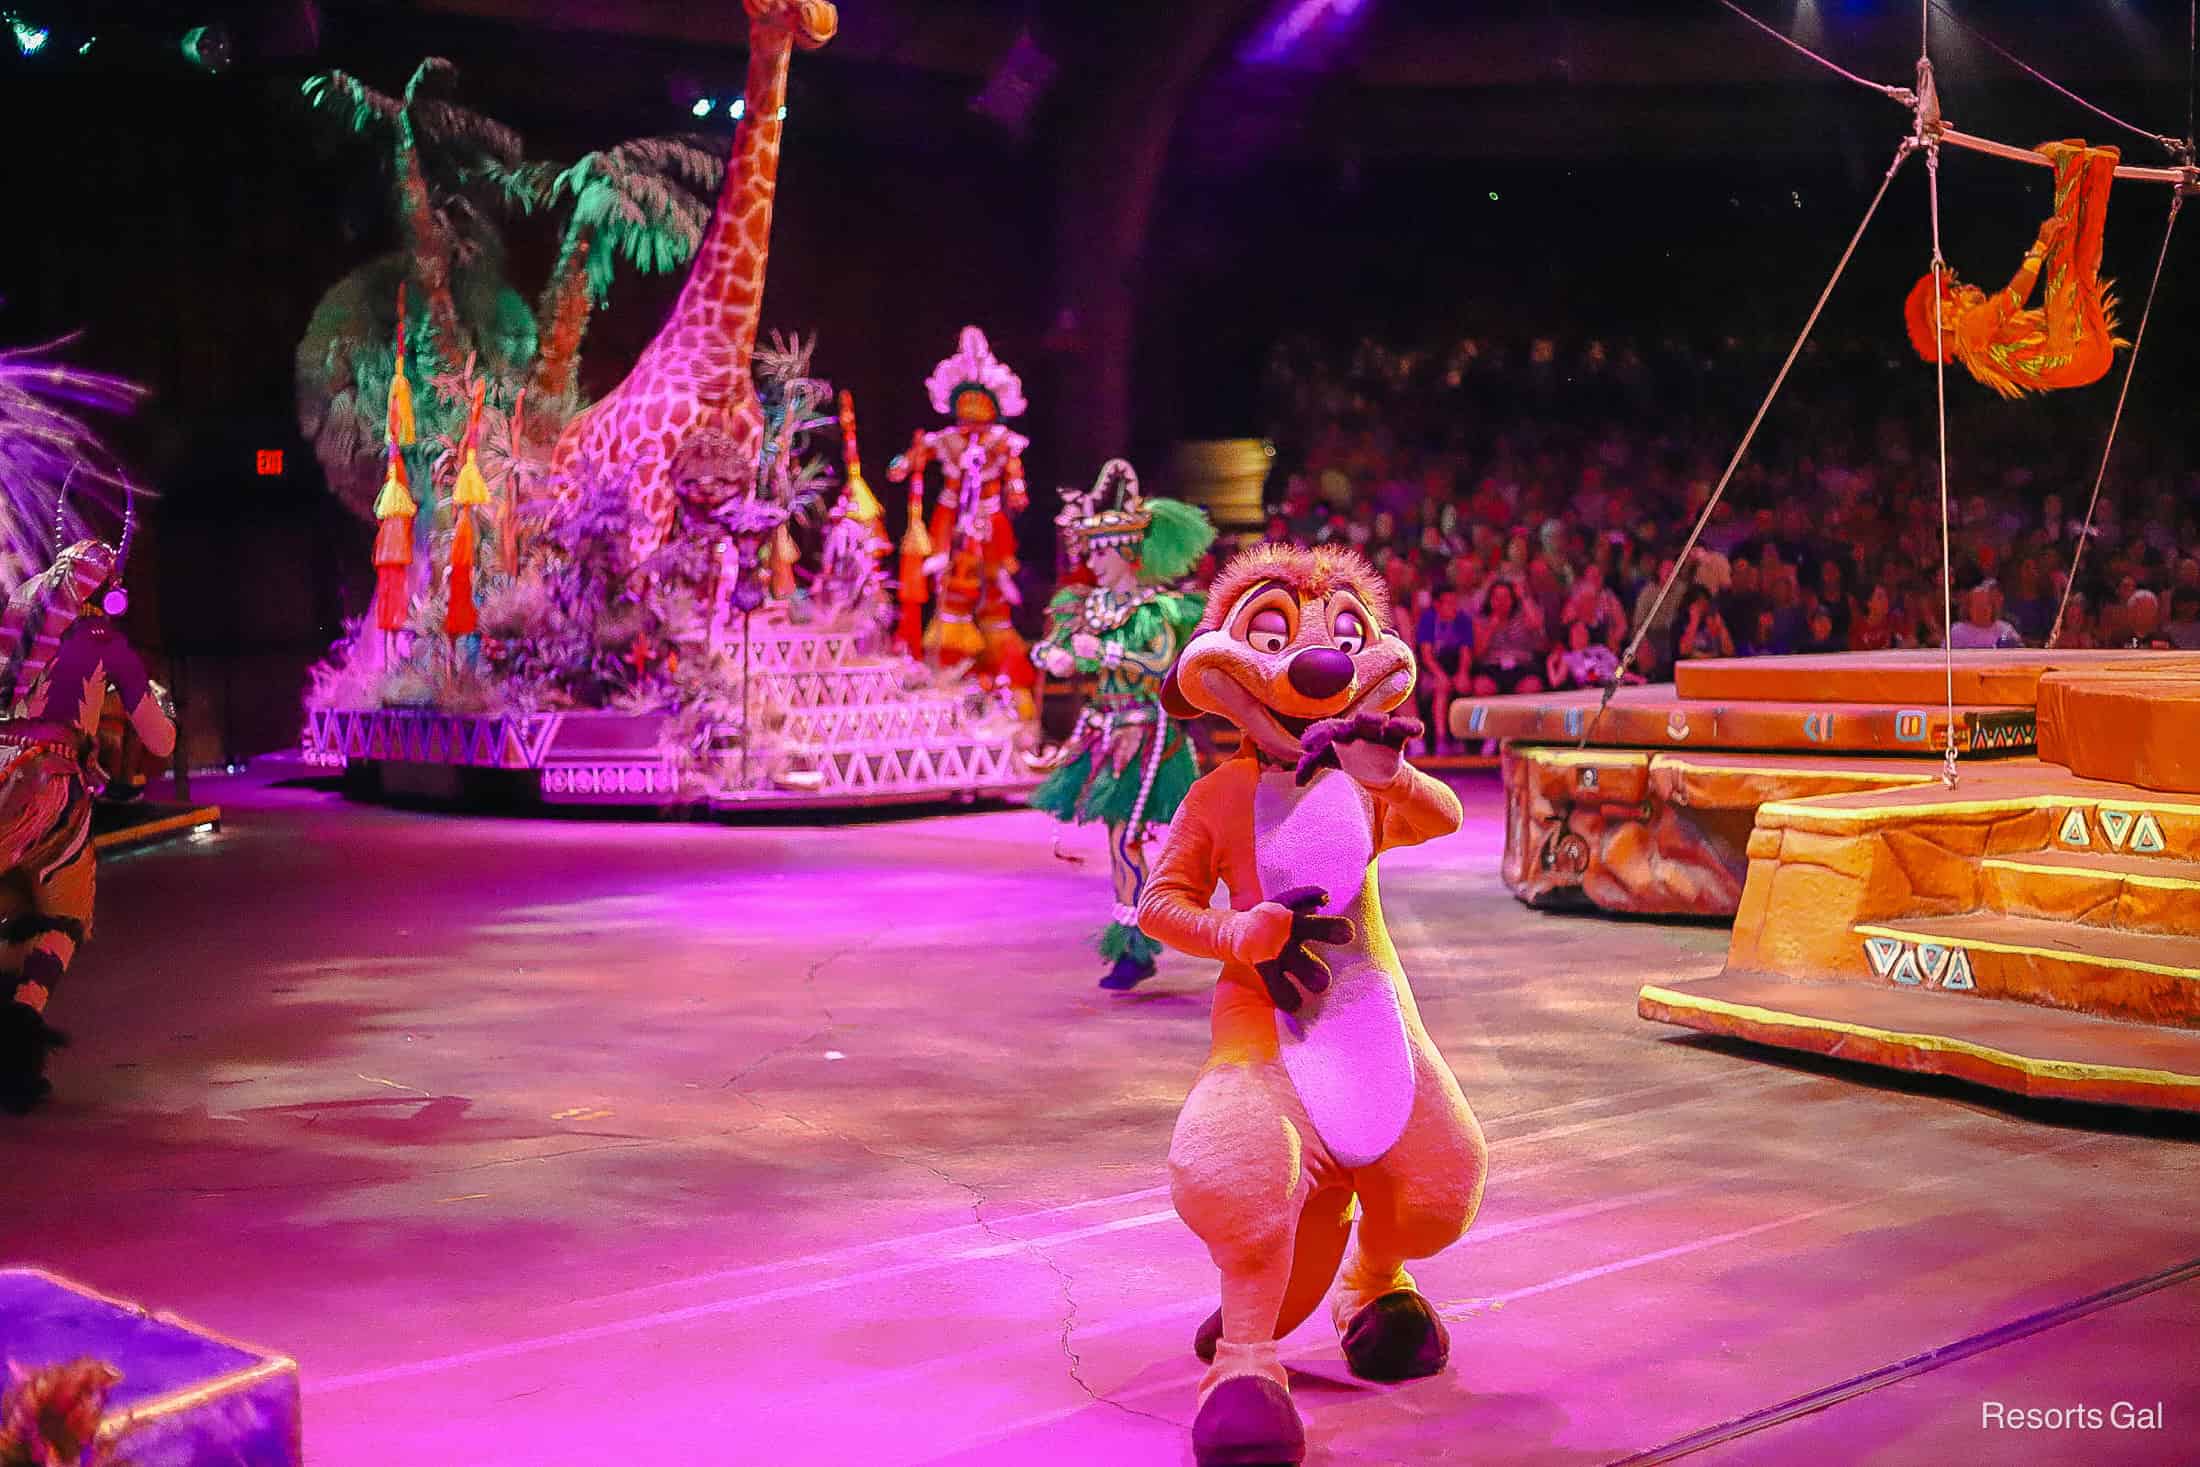 Timon waves to guests in the audience during Festival of the Lion King 